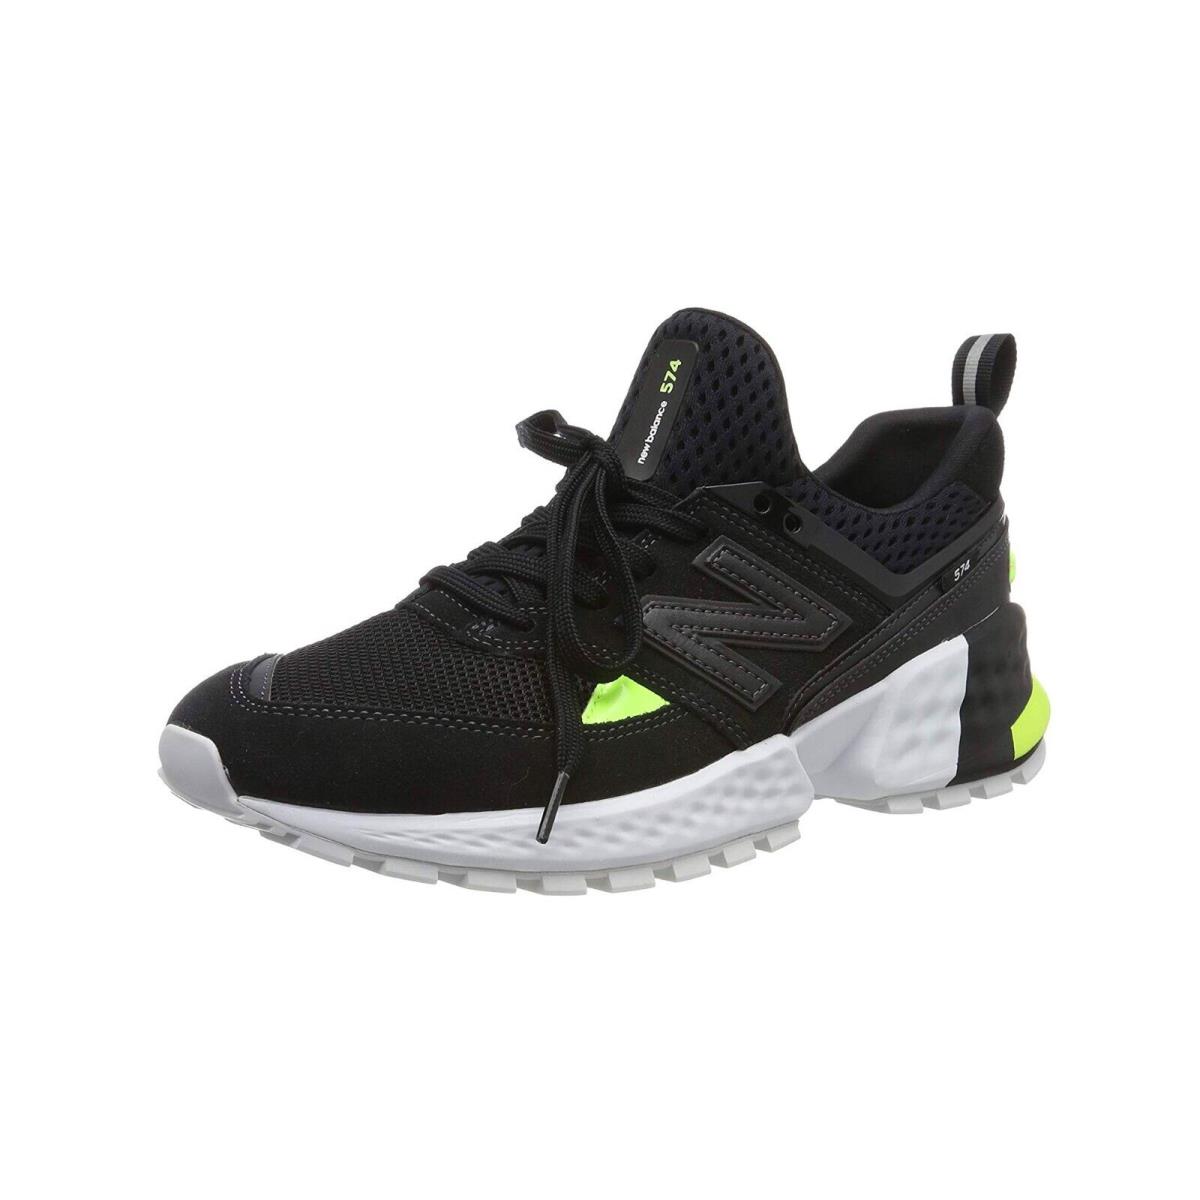 New Balance 574 Men`s Shoes Sneakers MS574BRB - Black/neon Green